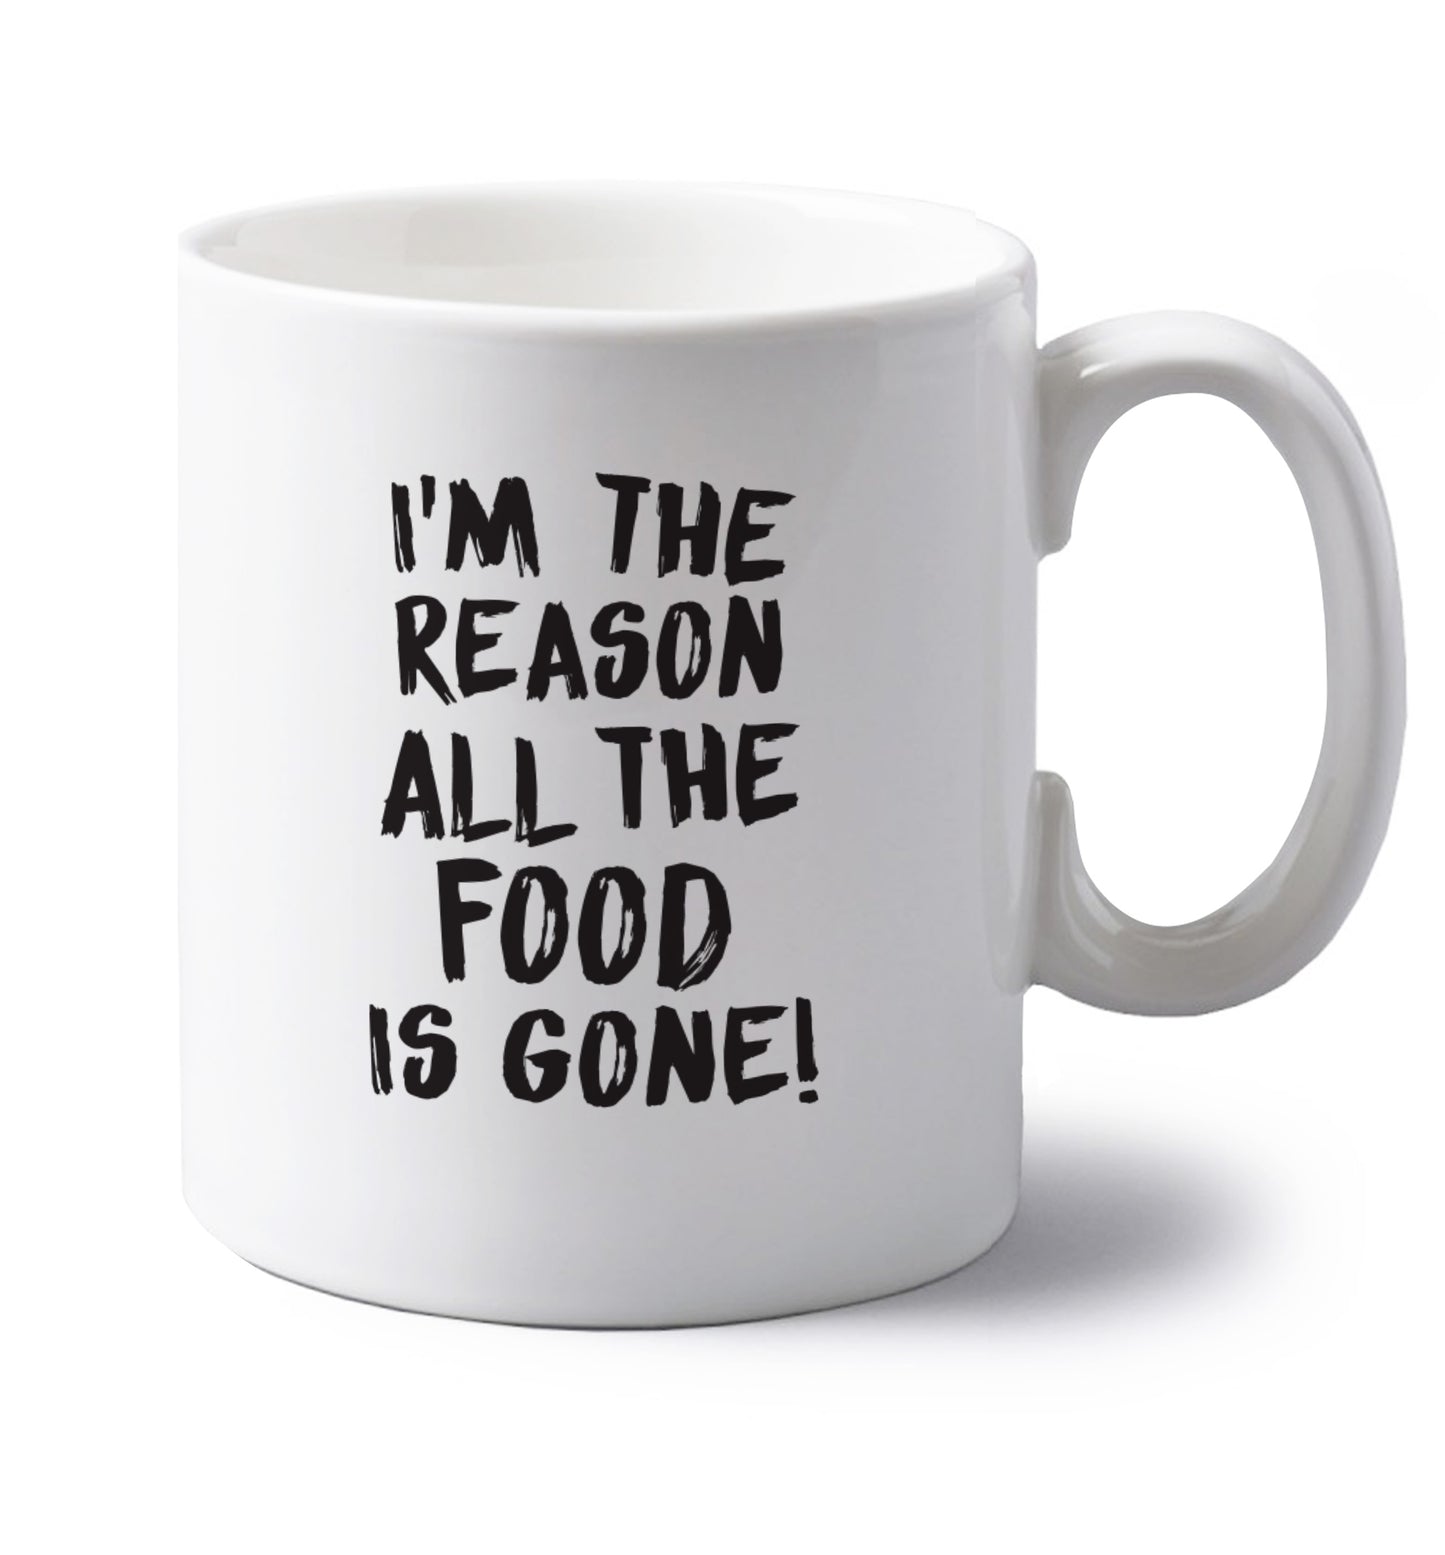 I'm the reason why all the food is gone left handed white ceramic mug 